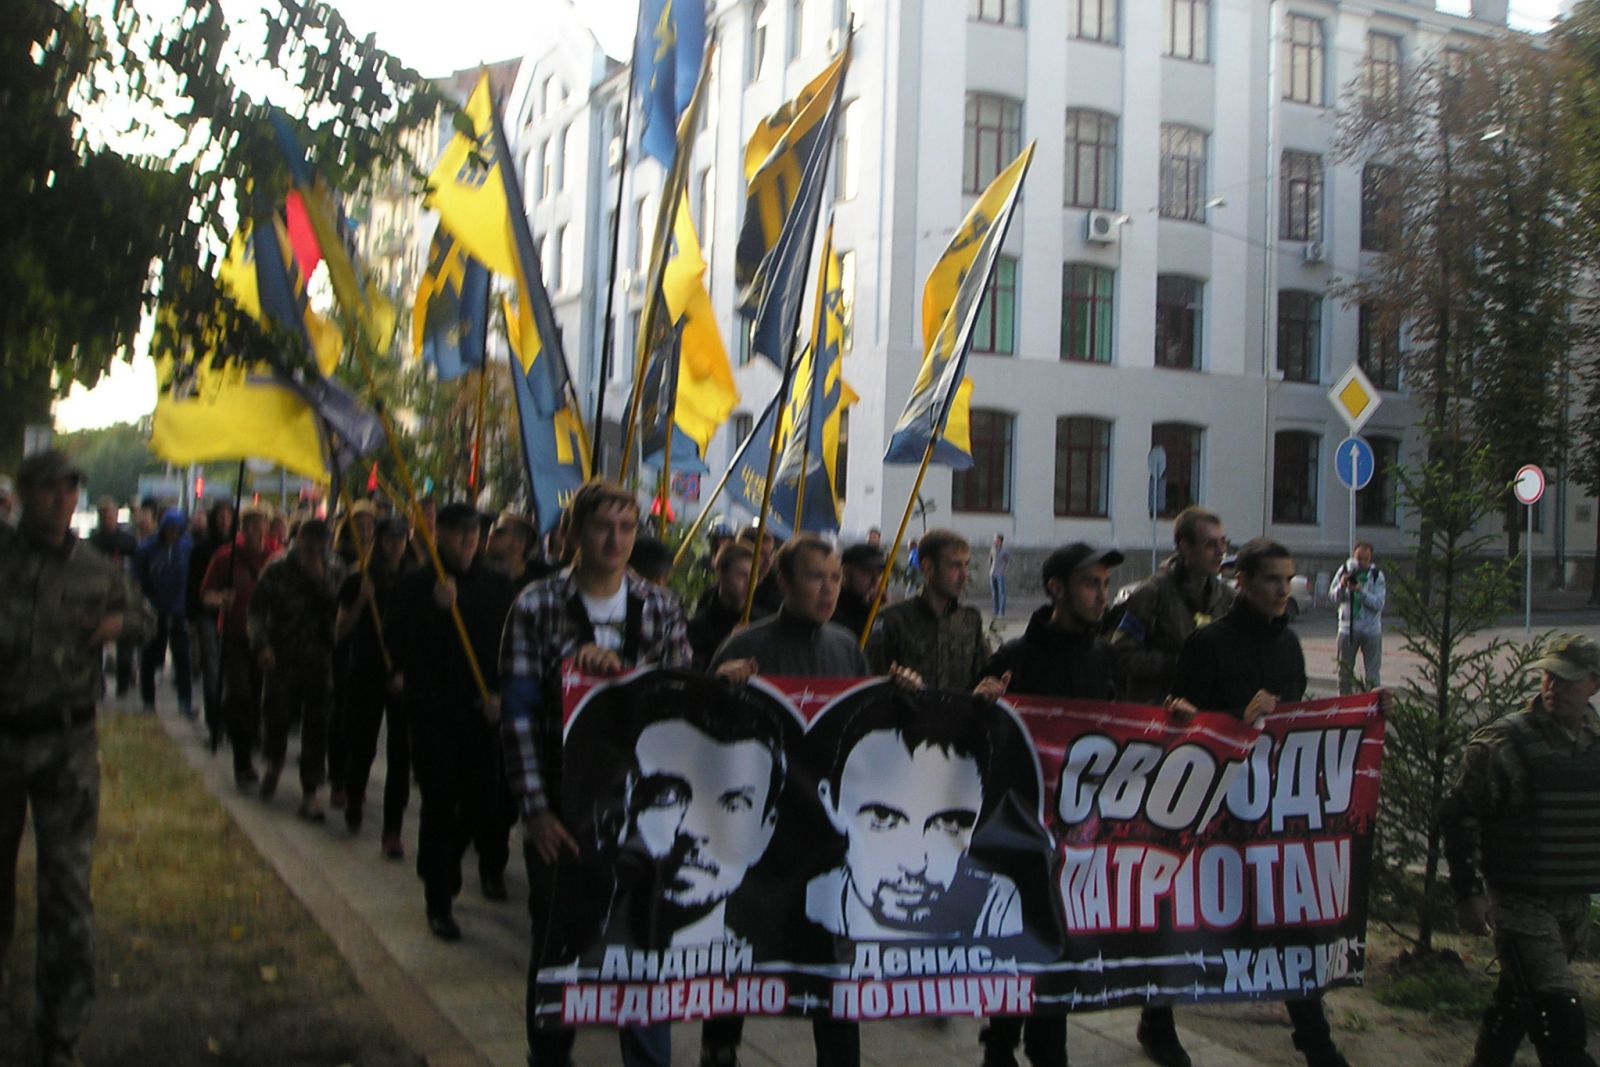 A march demanding to free Polishchuk and Buzyna, held on 12 September 2015 in Kharkiv. Photo: STATUS QUO